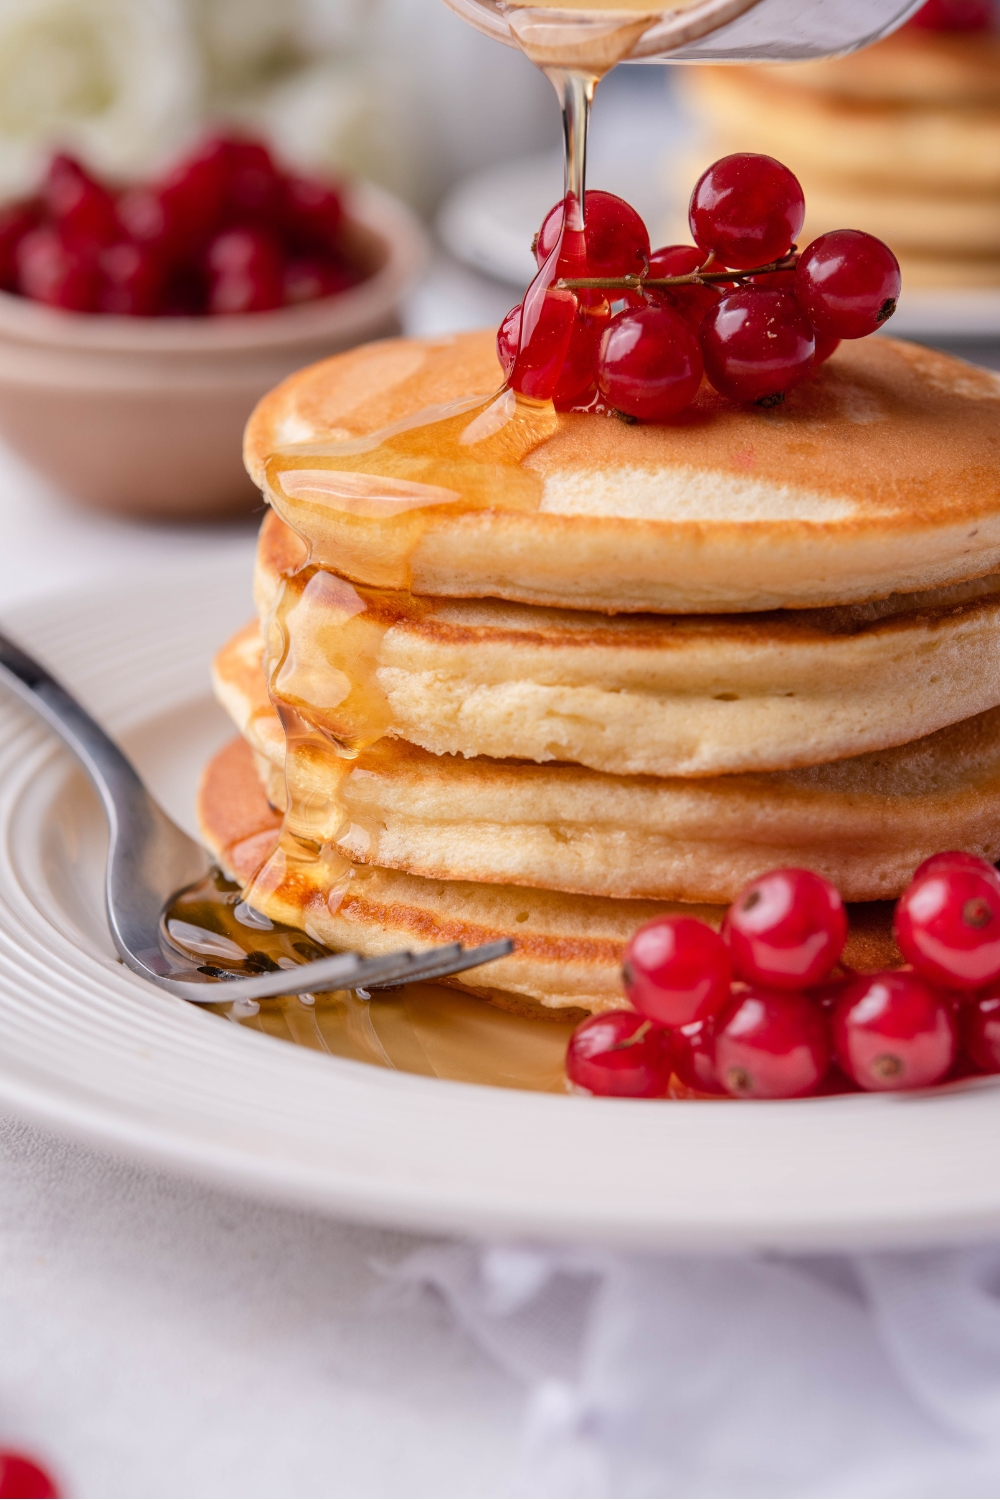 A stack of pancakes topped with fresh berries. Fresh syrup is being poured over the stack.